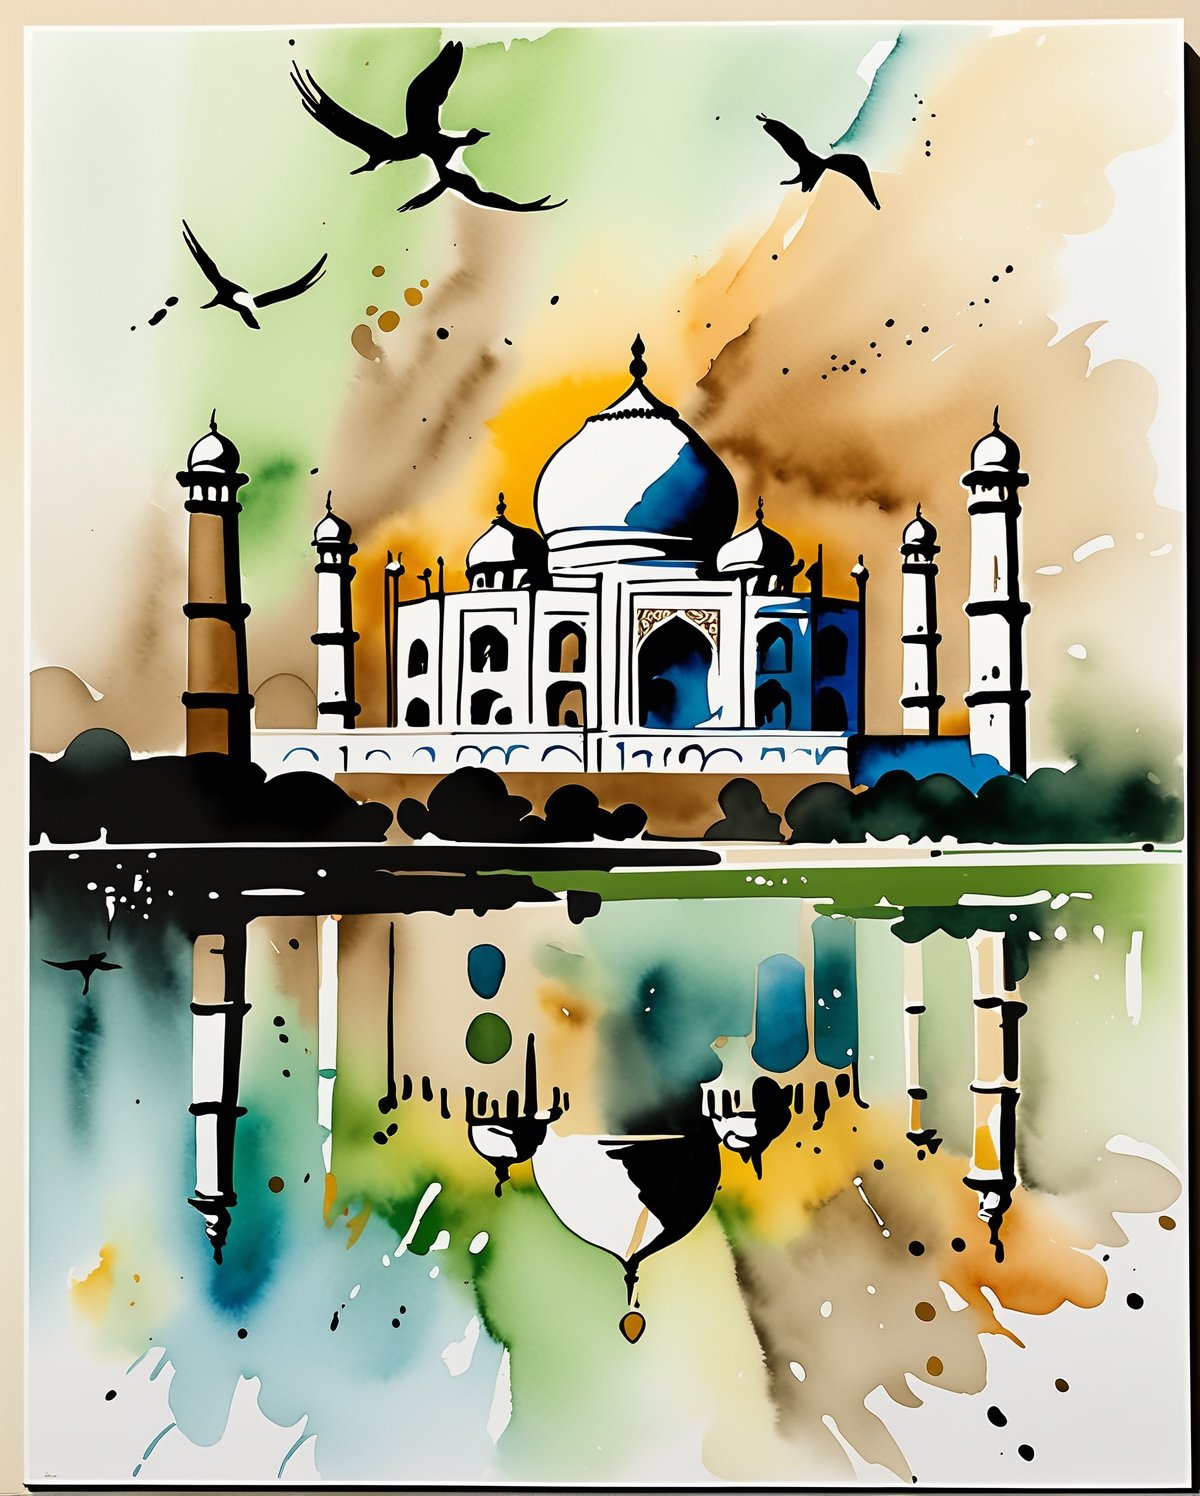 In this artistic endeavor, fuse the traditional Chinese ink wash technique with the stylistic essence of Wu Guanzhong, blending it seamlessly with Western artistic concepts to depict the iconic Taj Mahal in a contemporary artistic representation. Embrace the fluidity and expressive brushwork characteristic of Chinese ink painting, capturing the intricate details and architectural splendor of the Taj Mahal with bold strokes and dynamic composition. Integrate Western painting elements such as perspective, light, and shadow to add depth and dimension to the scene, enhancing the majestic presence of the monument. Focus on capturing the timeless beauty and cultural significance of the Taj Mahal, infusing it with a sense of poetic tranquility and universal resonance. Let the synthesis of Eastern and Western influences create a captivating visual narrative that transcends cultural boundaries and celebrates the enduring legacy of artistic expression.